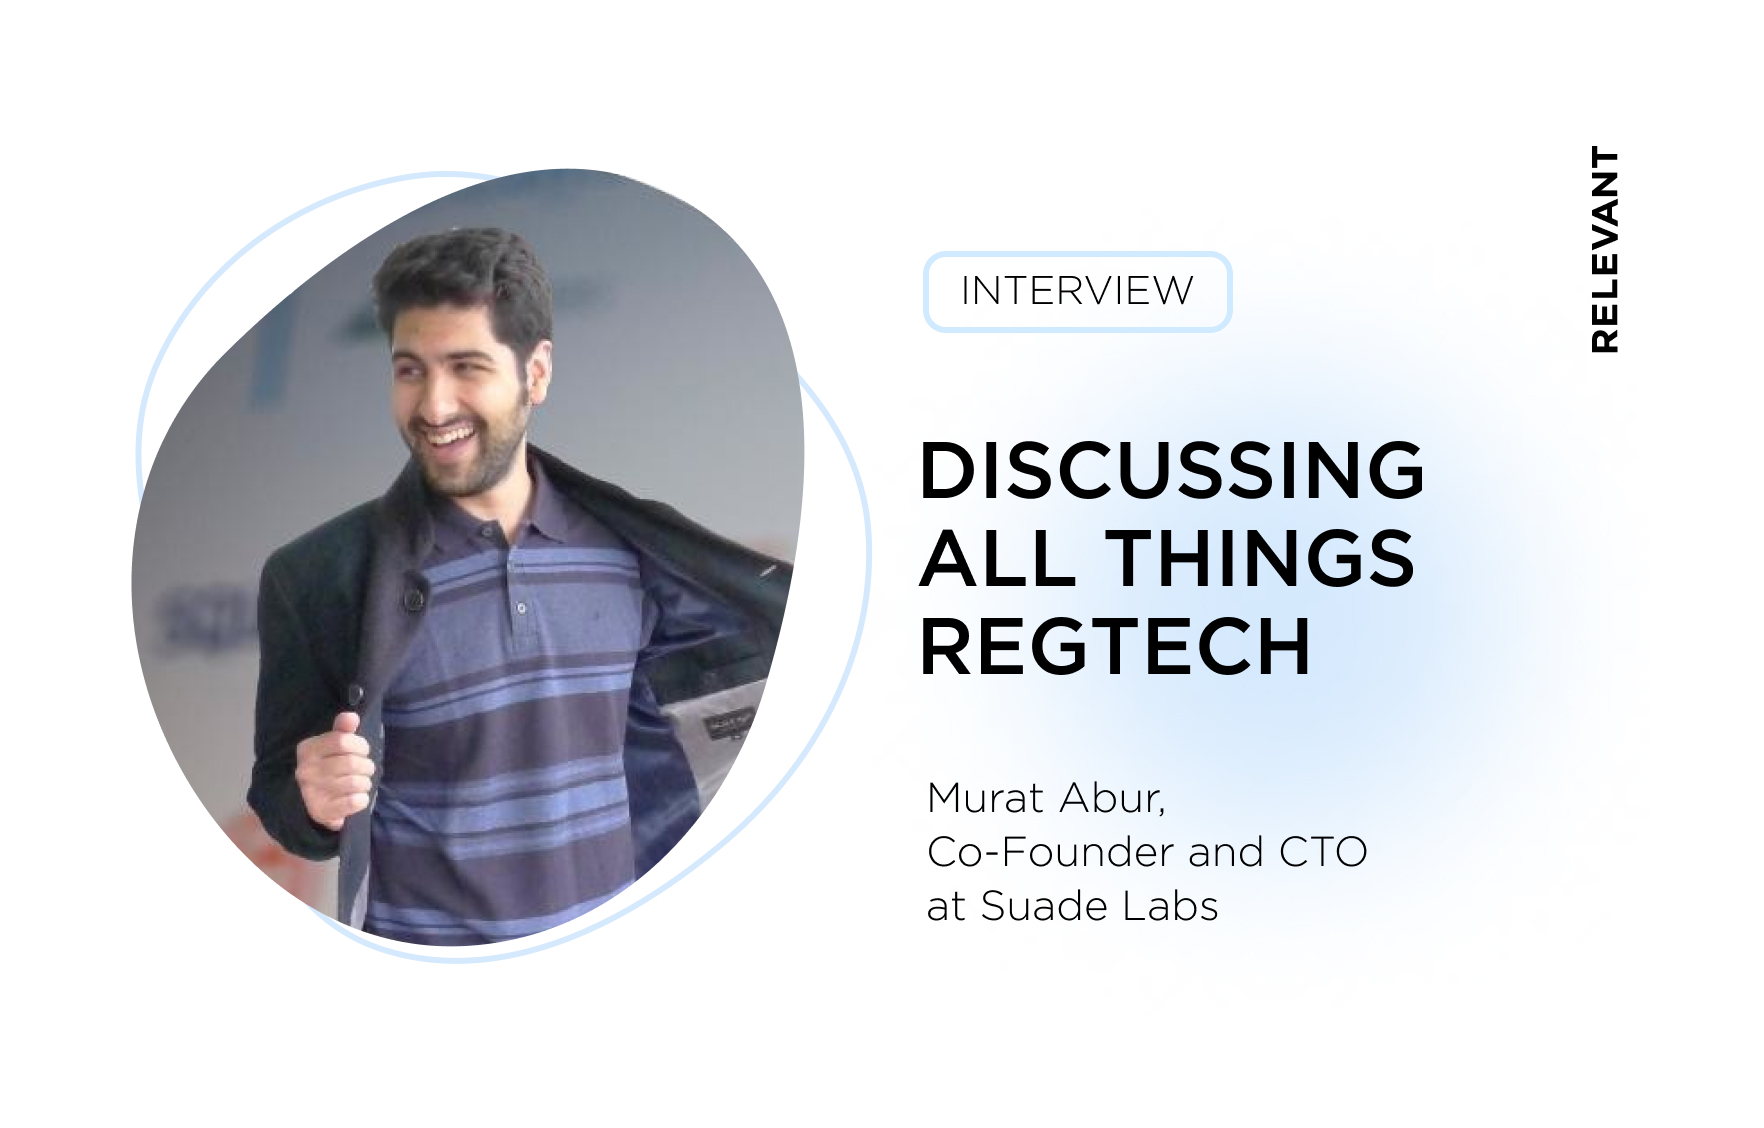 Murat Abur from Suade Labs Sits Down to Discuss All Things Regtech